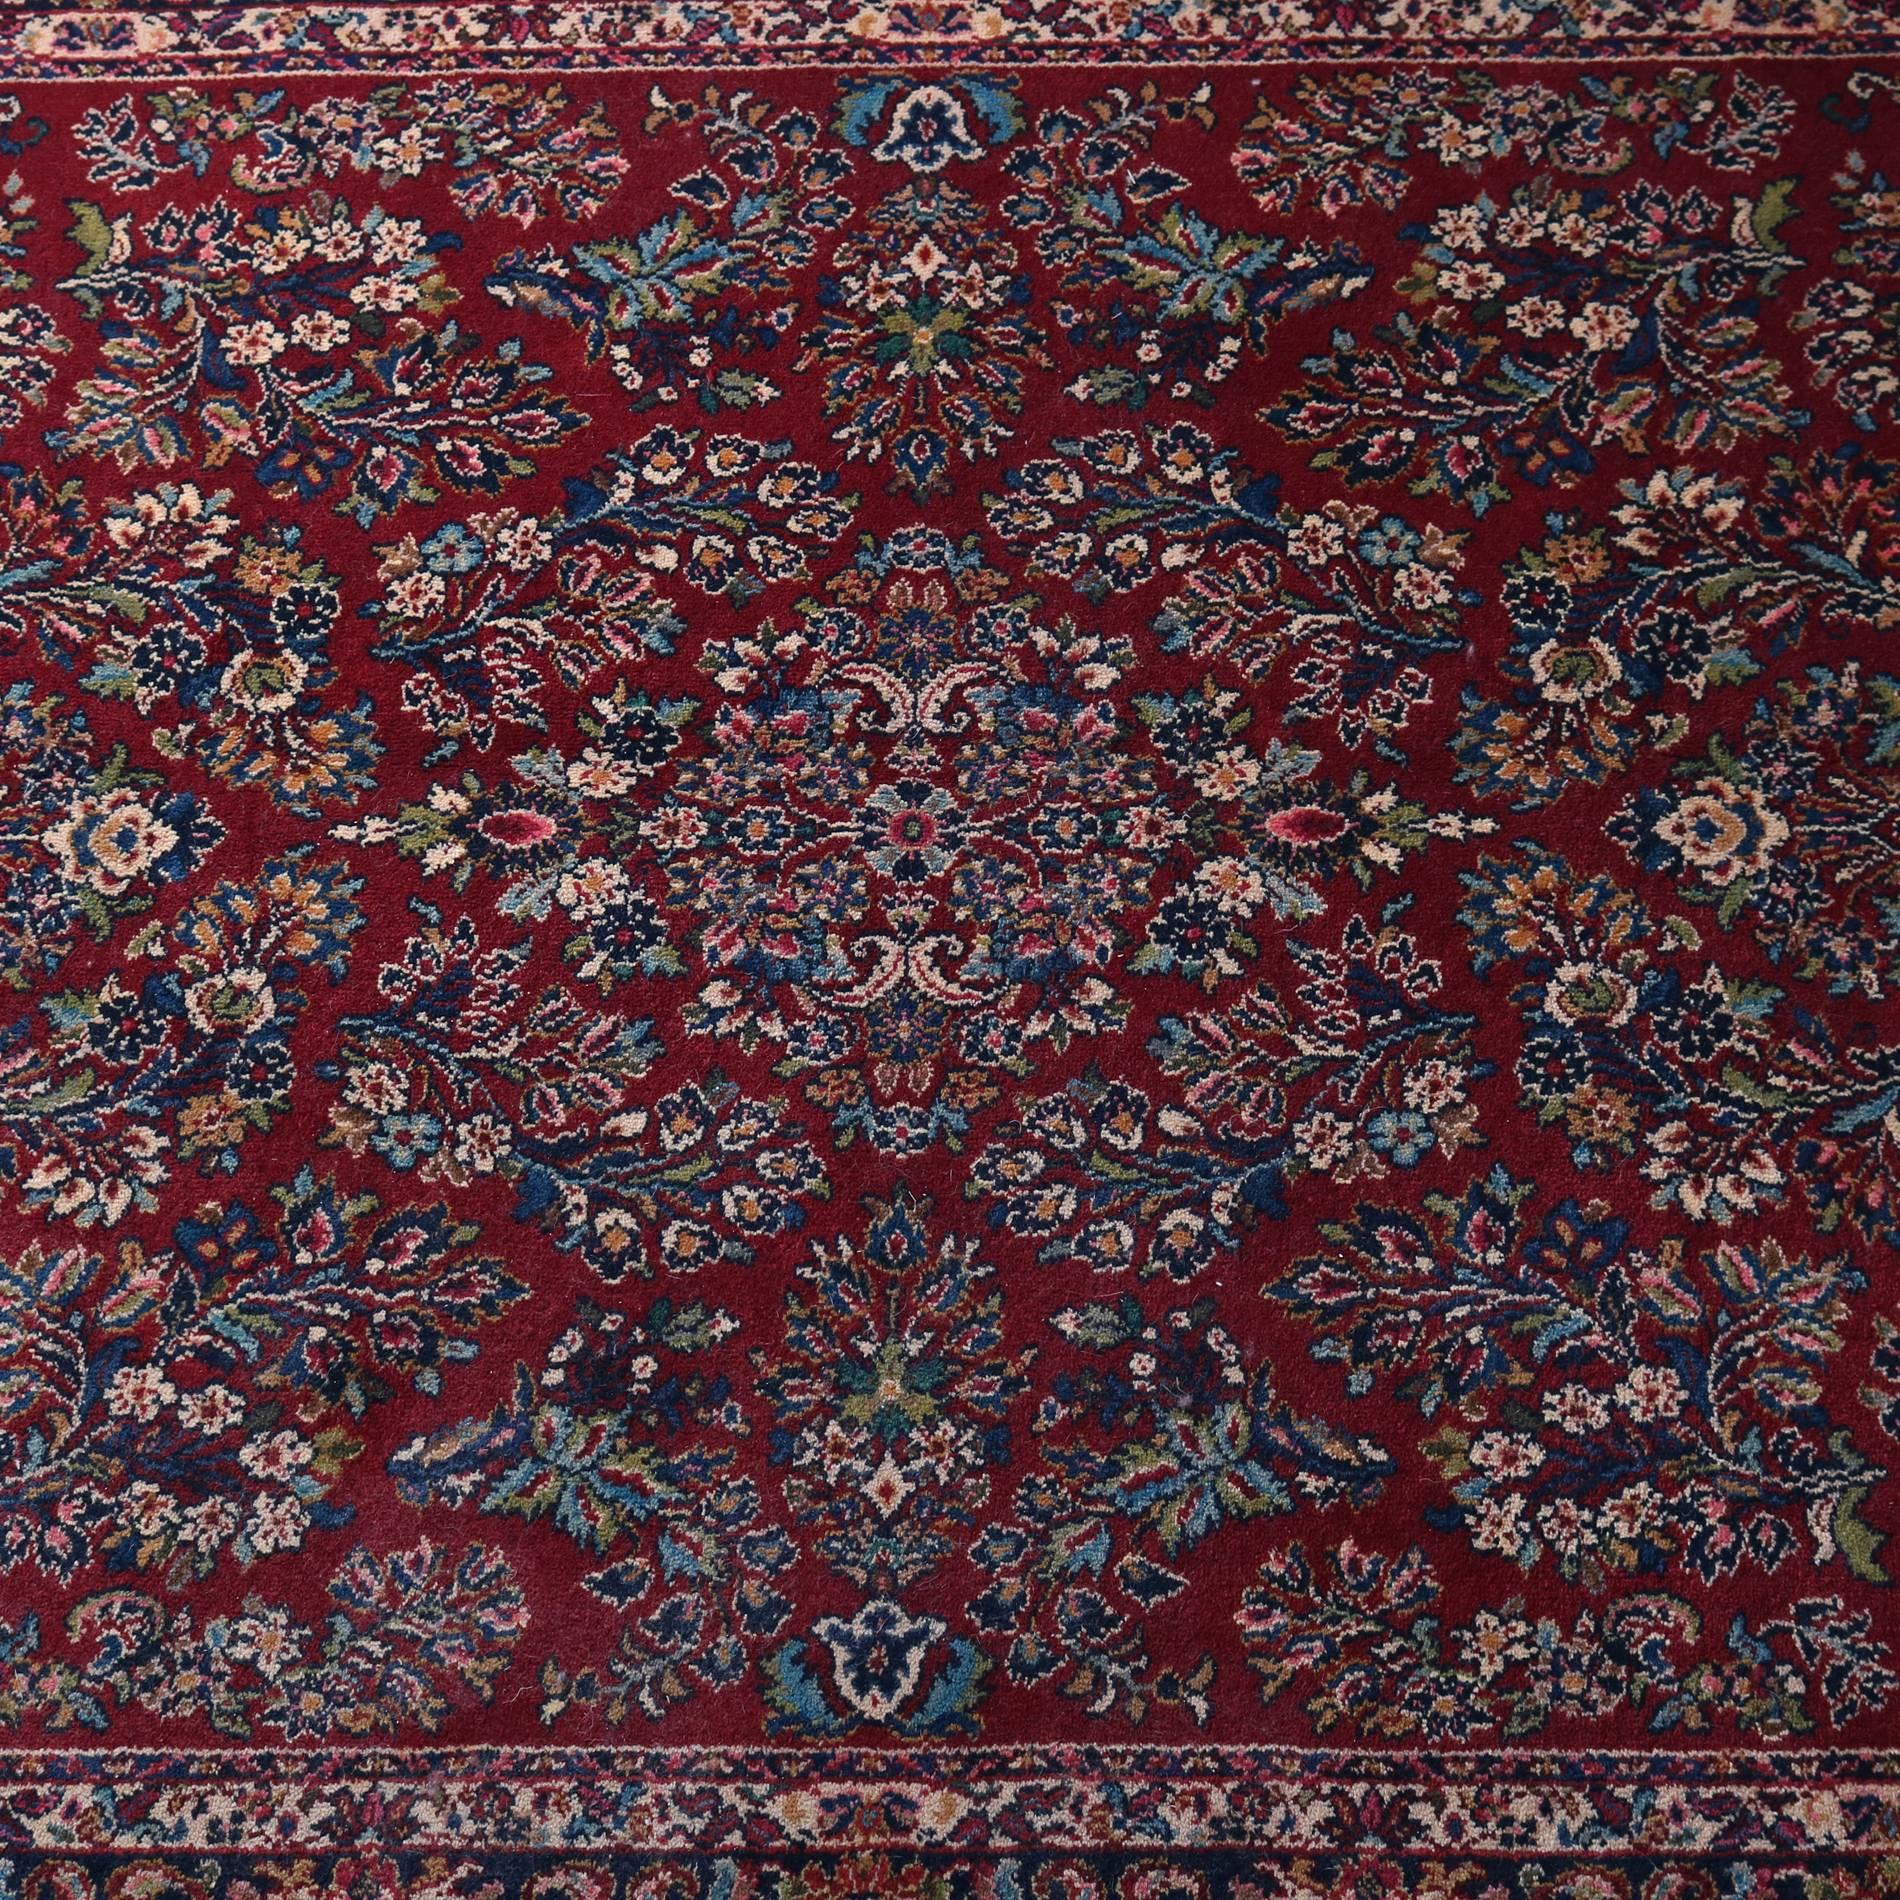 Vintage Persian style Oriental rug by Karastan features detached floral spray pattern with central medallion on red ground, wool, original tag "Red Sarouk” design 785", 5'9" x 9", 20th century

Measures - 5'9" x 9'.